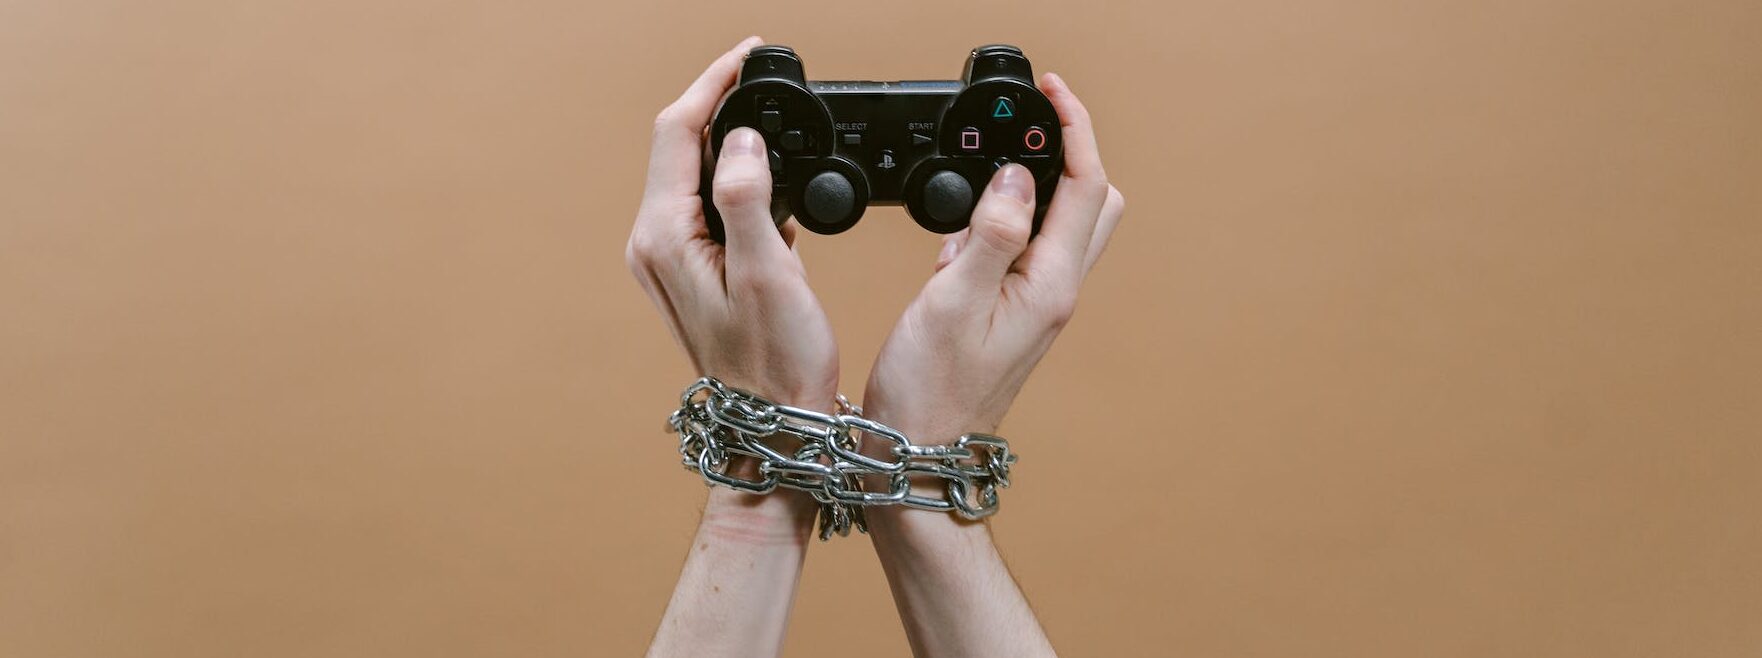 close up shot of a person holding a game controller